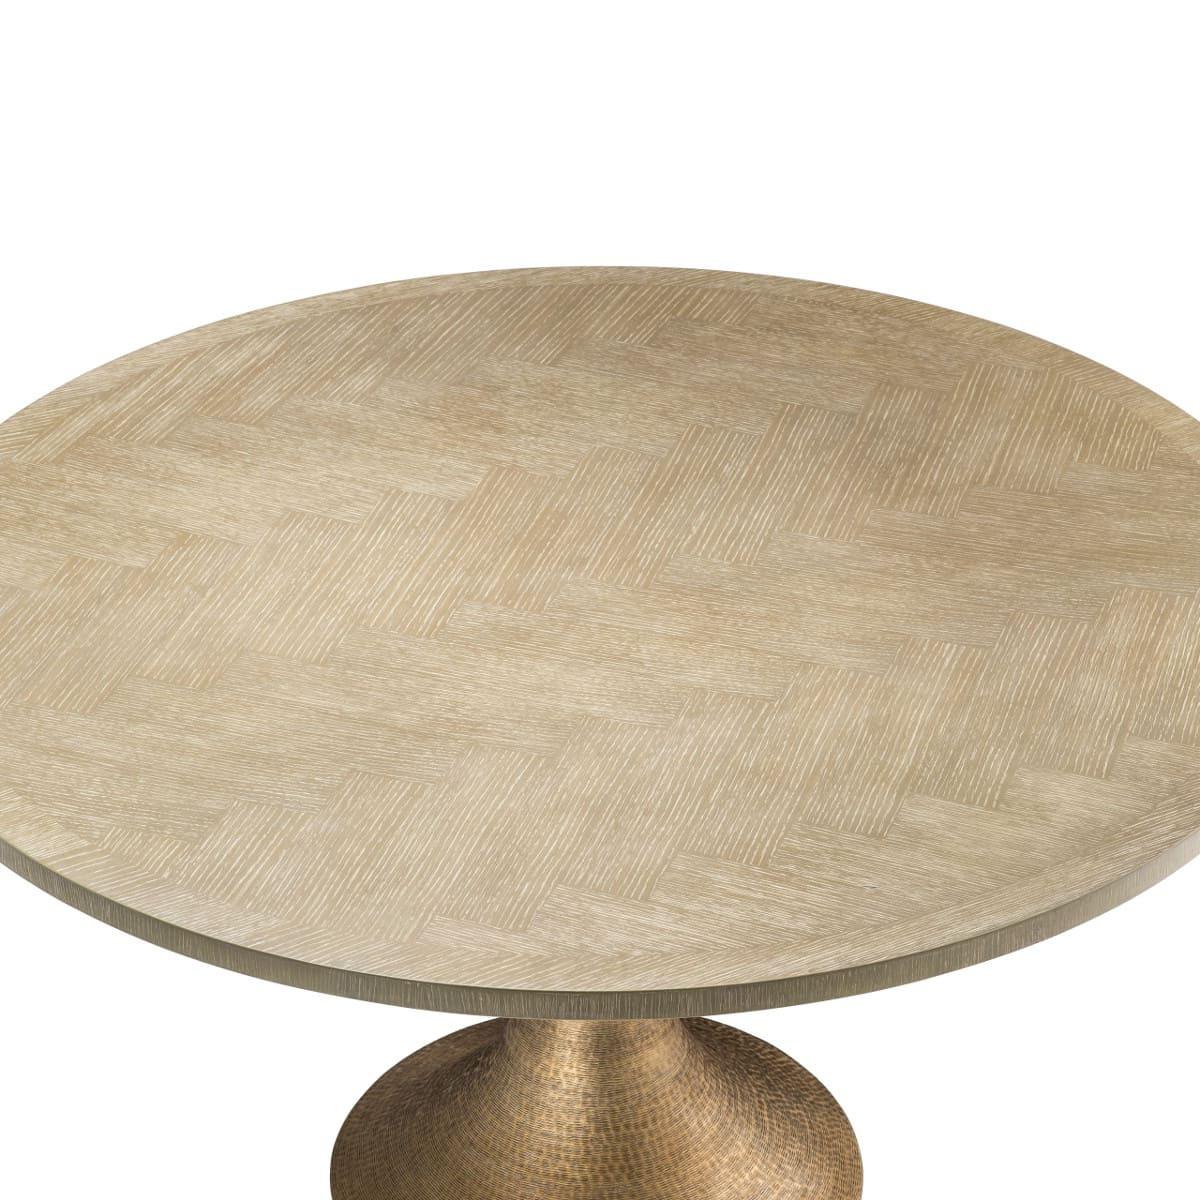 1970s design style round pedestal dining table with brushed brass base and patina oak wooden tray.